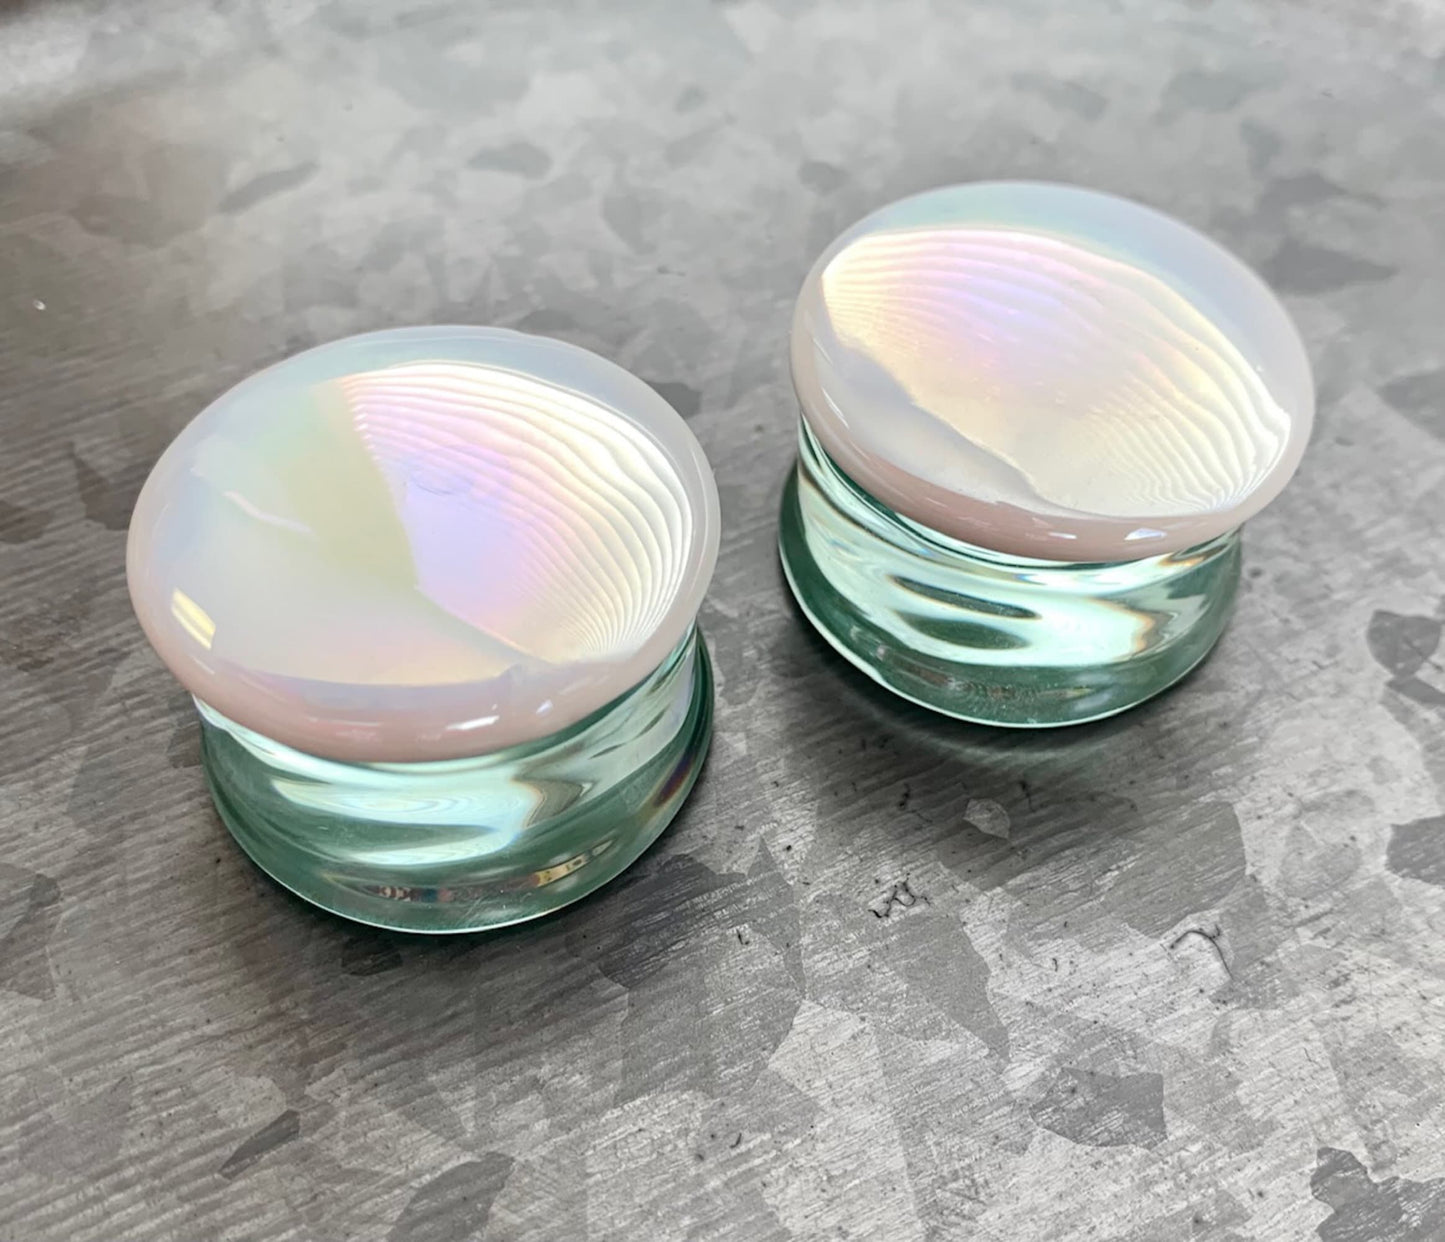 PAIR of Unique White Pearl Design Pyrex Glass Double Flare Plugs - Gauges 12mm through 1&3/16" (30mm) available!